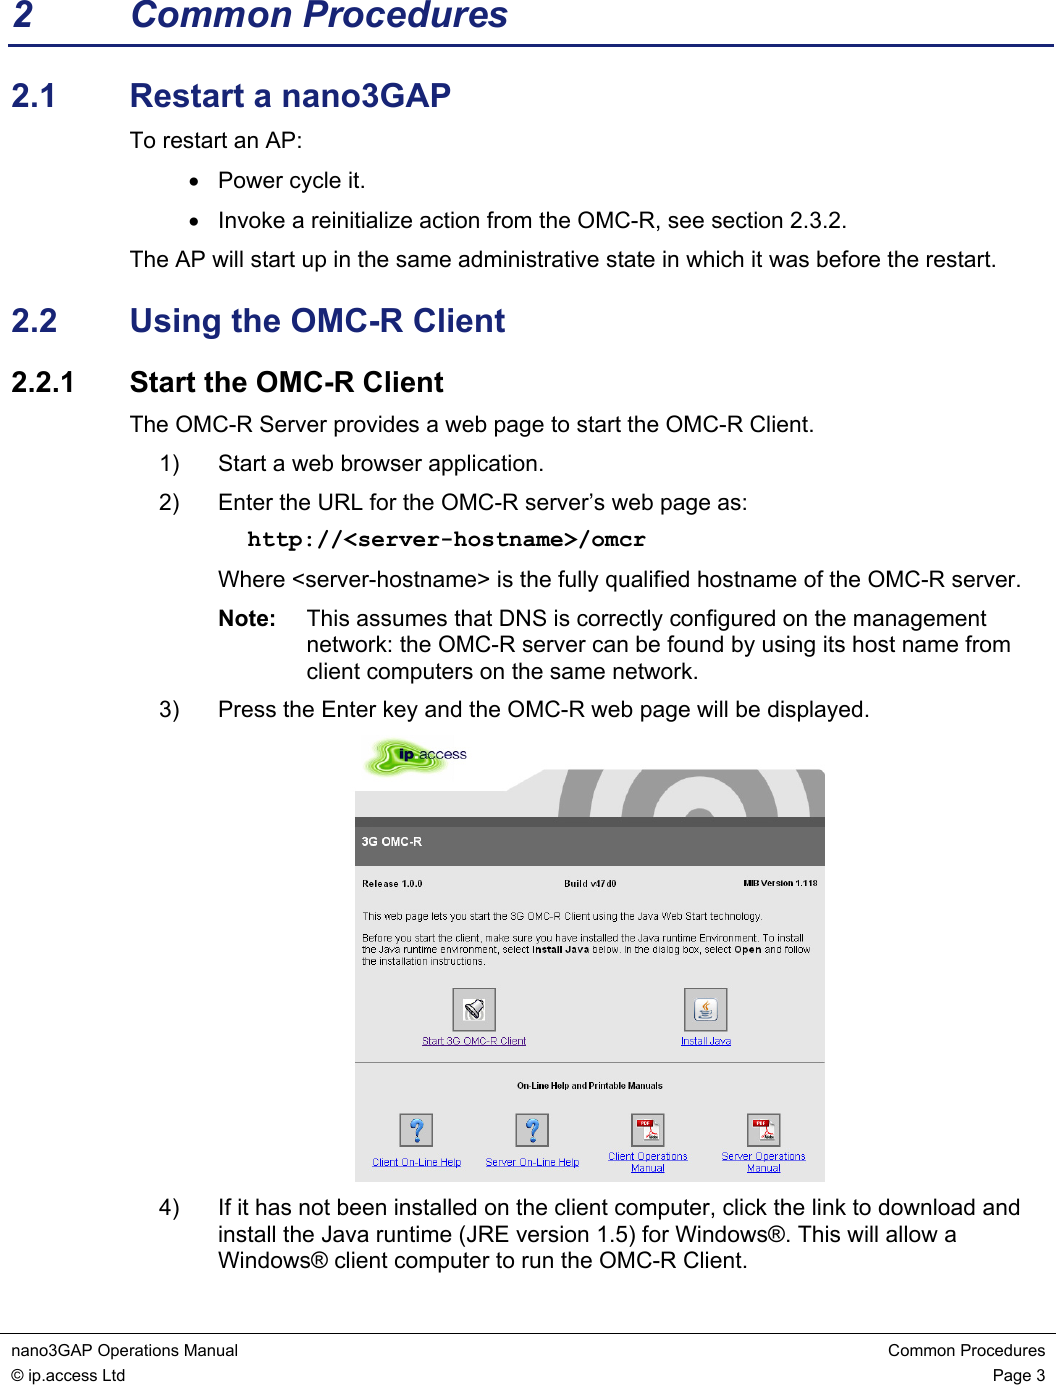 nano3GAP Operations Manual  Common Procedures © ip.access Ltd  Page 3  2 Common Procedures 2.1  Restart a nano3GAP To restart an AP: •  Power cycle it. •  Invoke a reinitialize action from the OMC-R, see section 2.3.2. The AP will start up in the same administrative state in which it was before the restart. 2.2  Using the OMC-R Client 2.2.1  Start the OMC-R Client The OMC-R Server provides a web page to start the OMC-R Client. 1)  Start a web browser application. 2)  Enter the URL for the OMC-R server’s web page as: http://&lt;server-hostname&gt;/omcr Where &lt;server-hostname&gt; is the fully qualified hostname of the OMC-R server. Note:  This assumes that DNS is correctly configured on the management network: the OMC-R server can be found by using its host name from client computers on the same network. 3)  Press the Enter key and the OMC-R web page will be displayed.  4)  If it has not been installed on the client computer, click the link to download and install the Java runtime (JRE version 1.5) for Windows®. This will allow a Windows® client computer to run the OMC-R Client. 